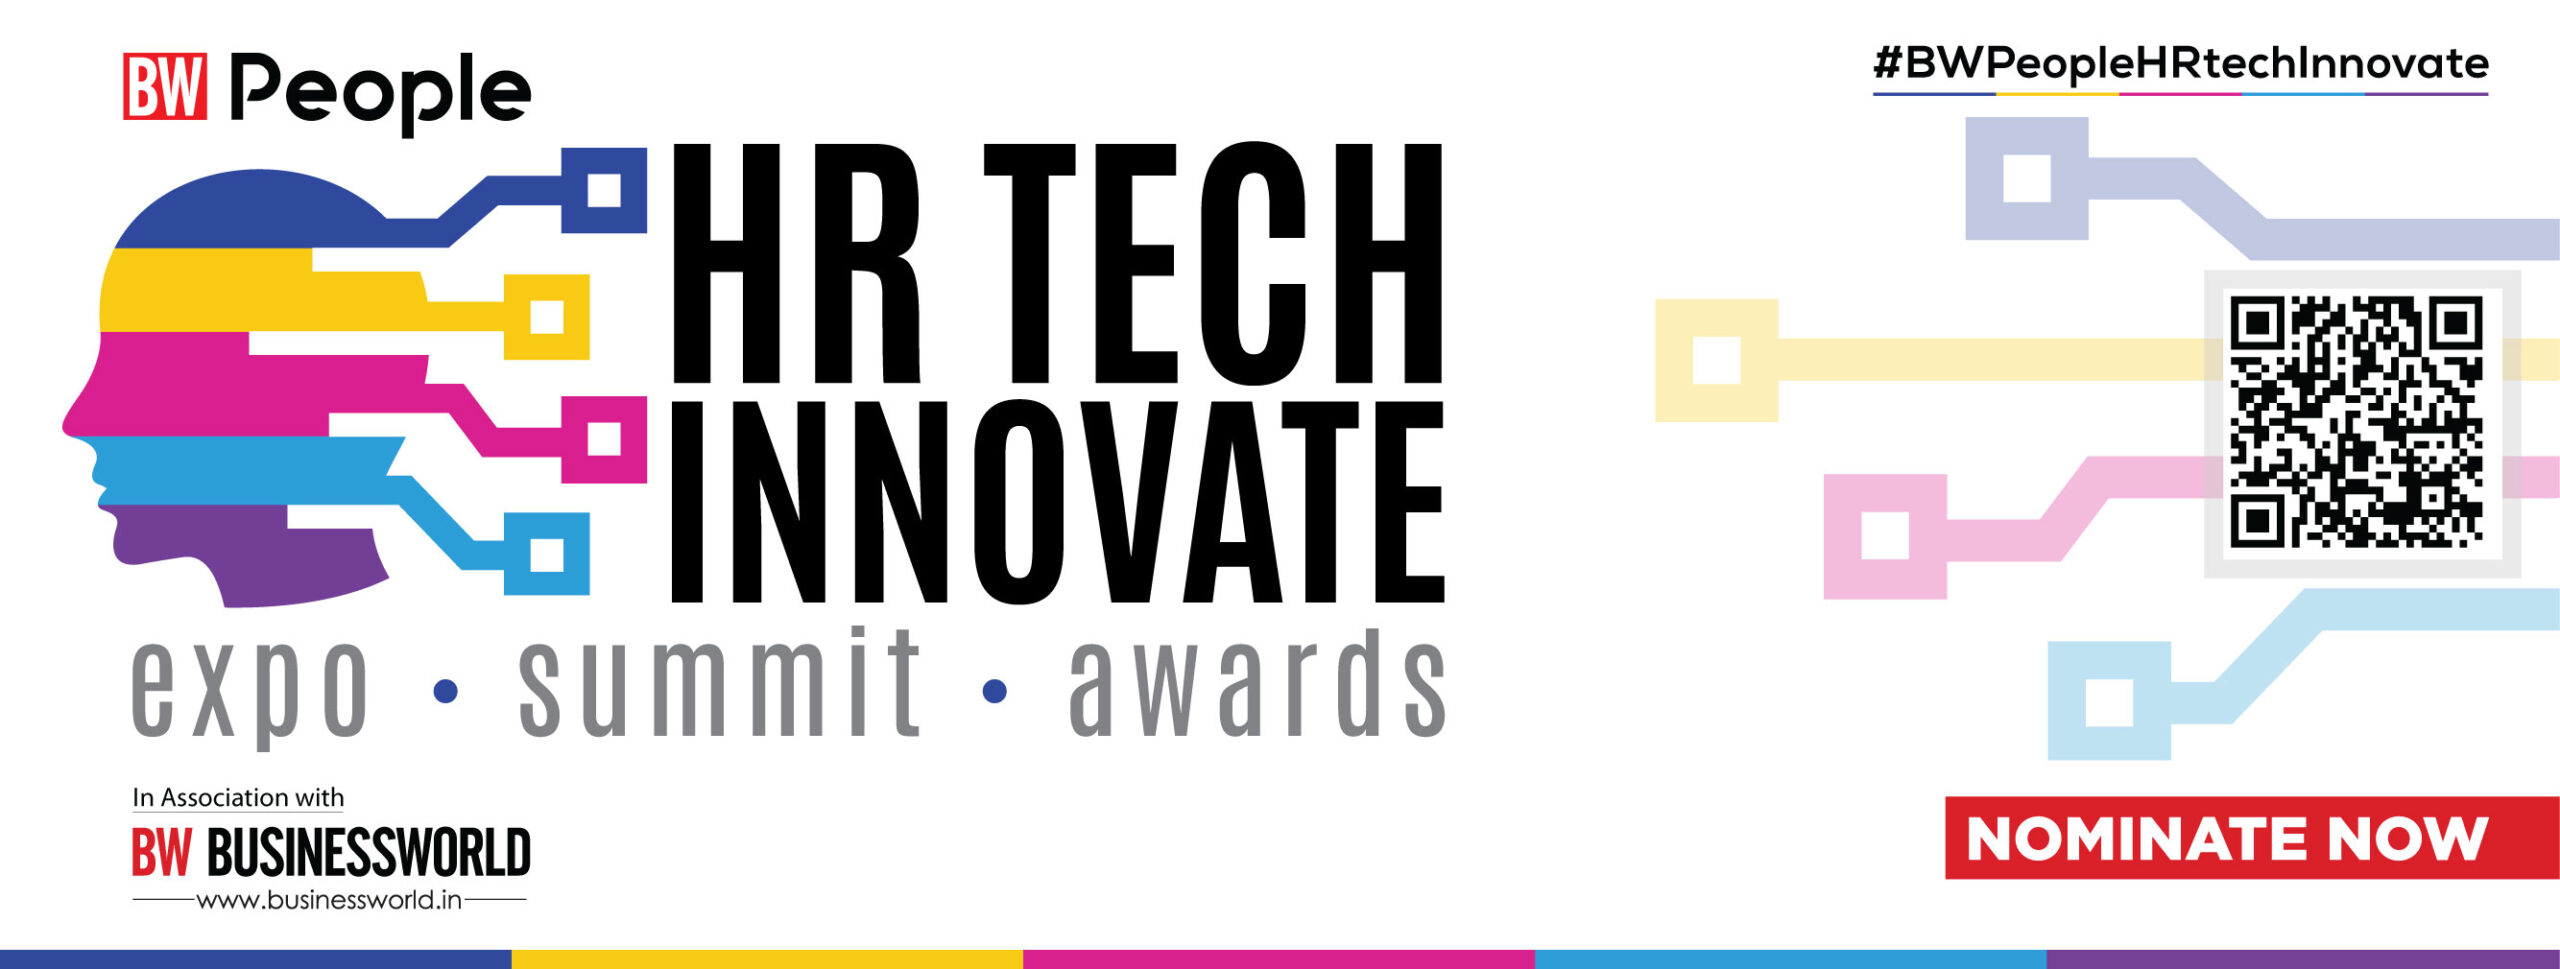 BW People: HR Tech | Expo, Summit & Awards 2023